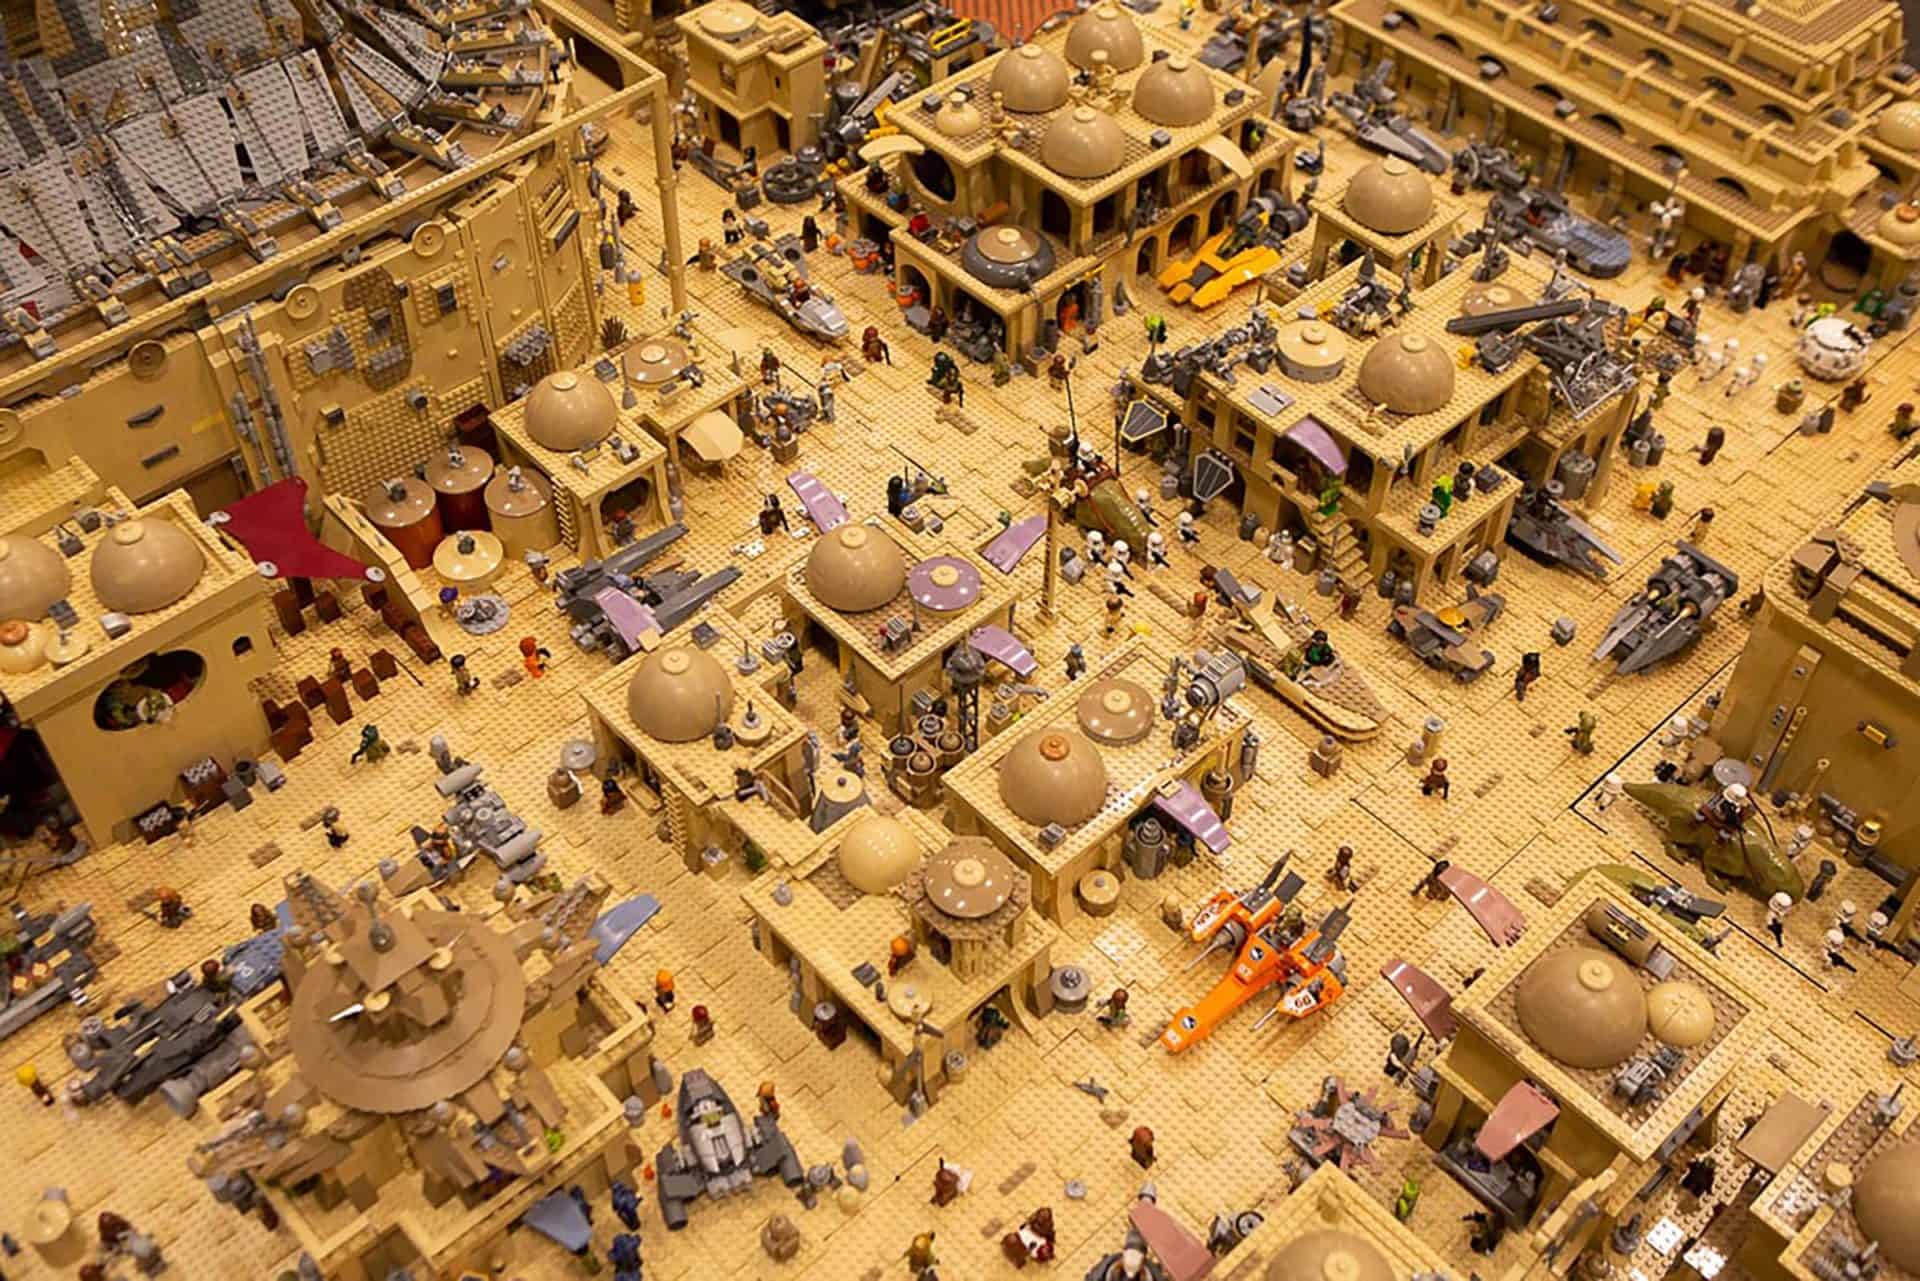 Mos Eisley from star wars made out of Lego at the Brick Festival